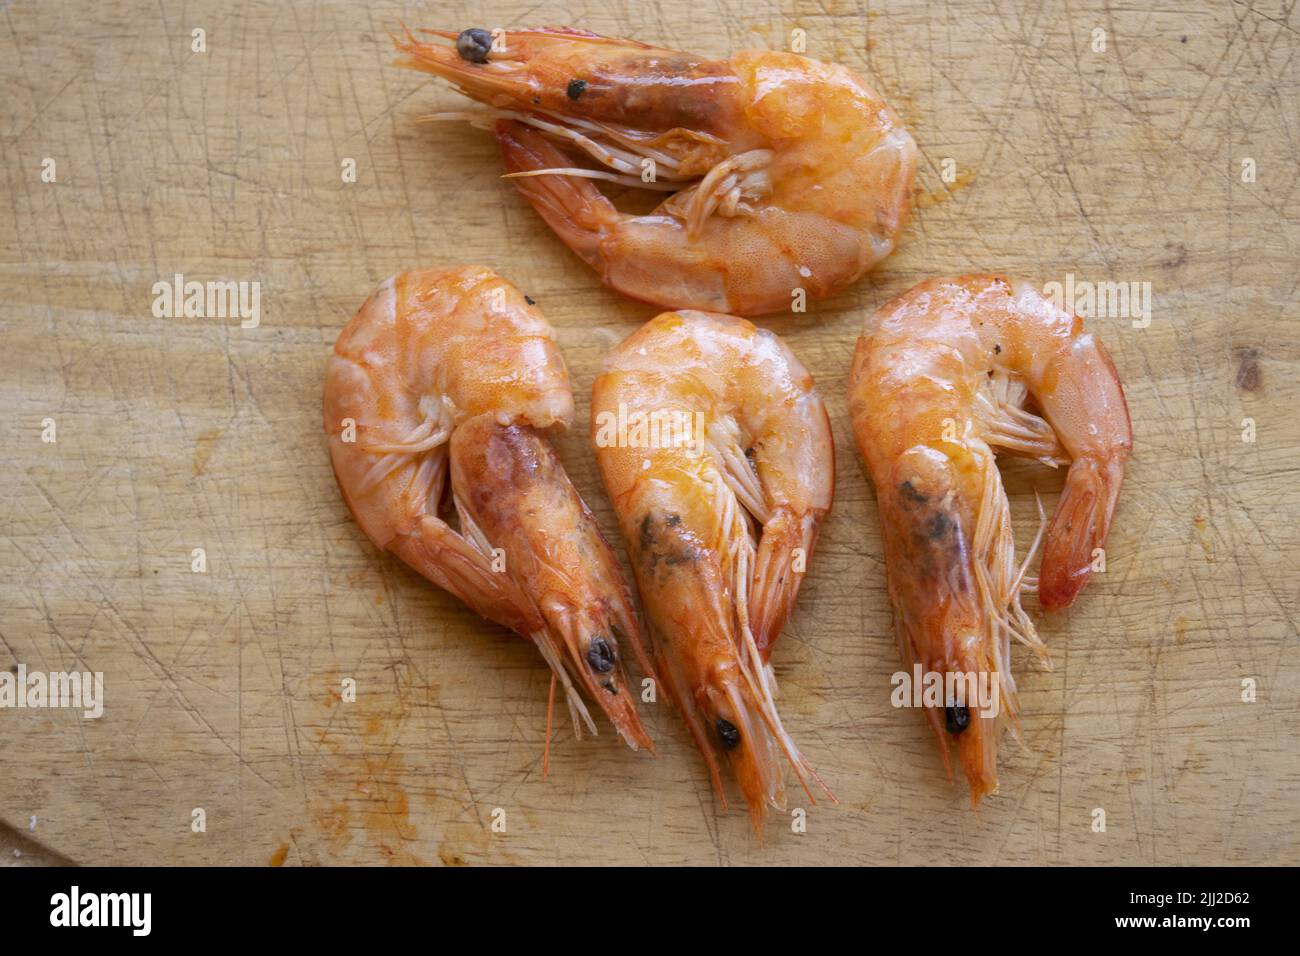 cooked fried shrimps on a wooden bacground Stock Photo